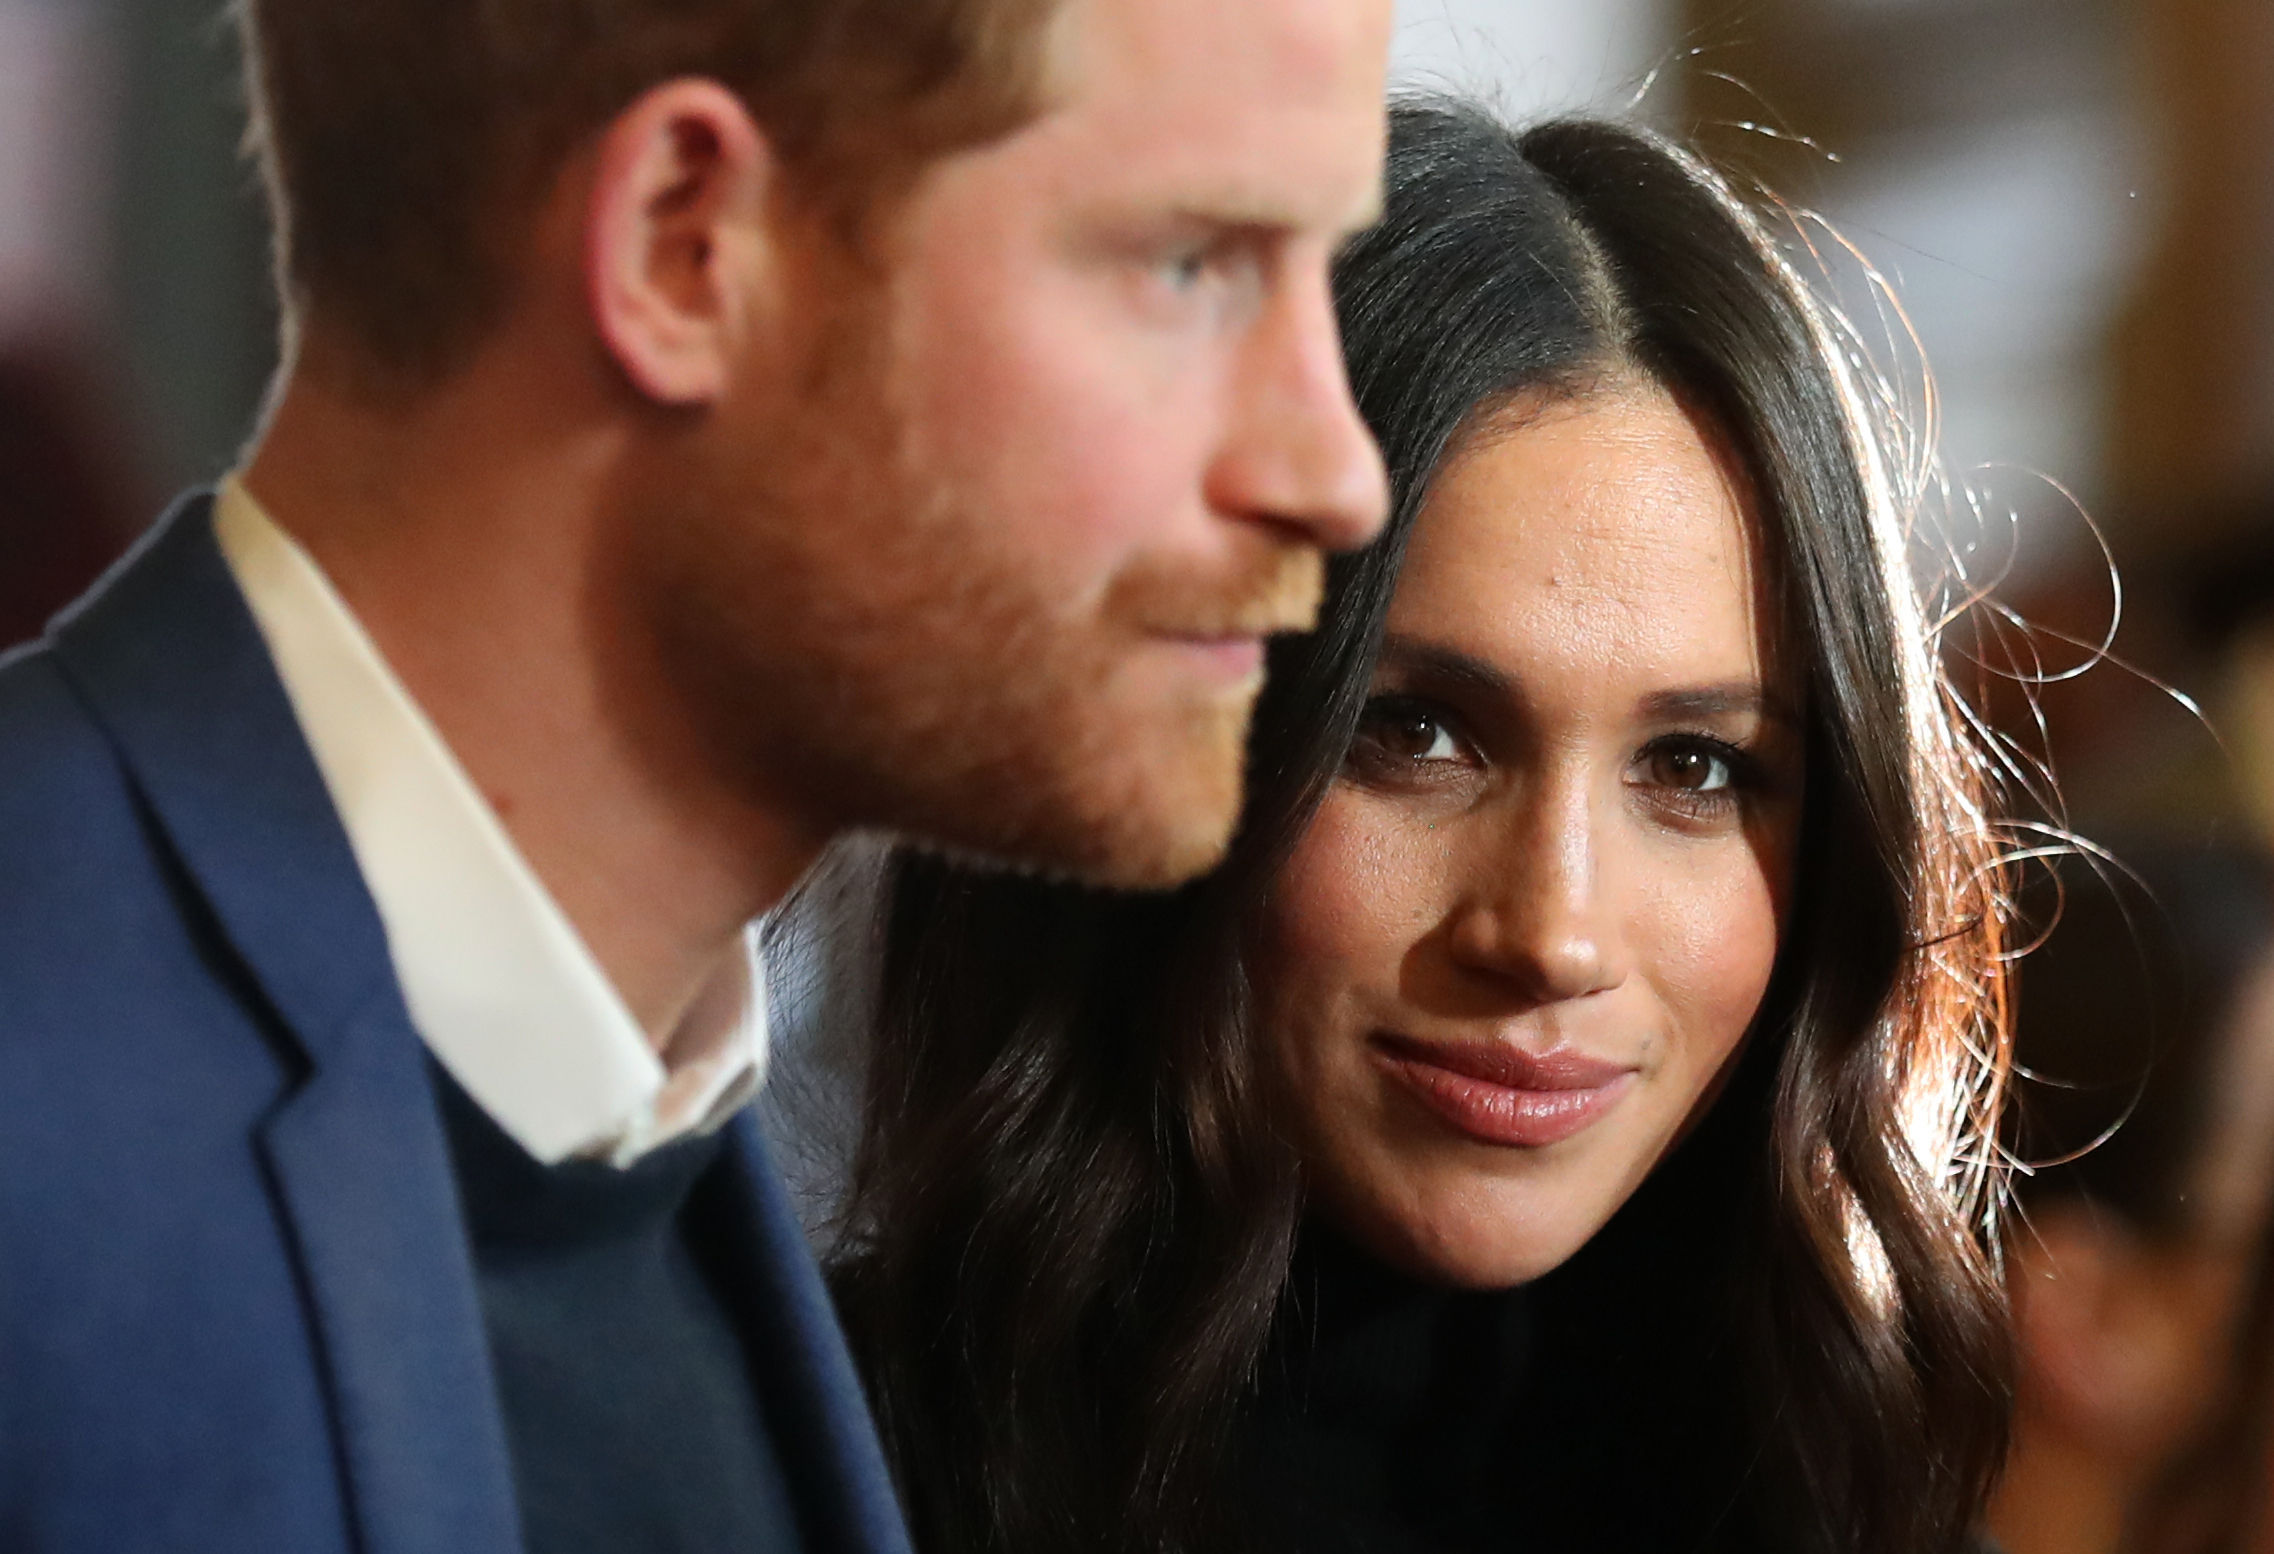 Prince Harry and Meghan Markle attend a reception for young people at the Palace of Holyroodhouse on February 13, 2018 in Edinburgh, Scotland. (WPA Pool—Getty Images)